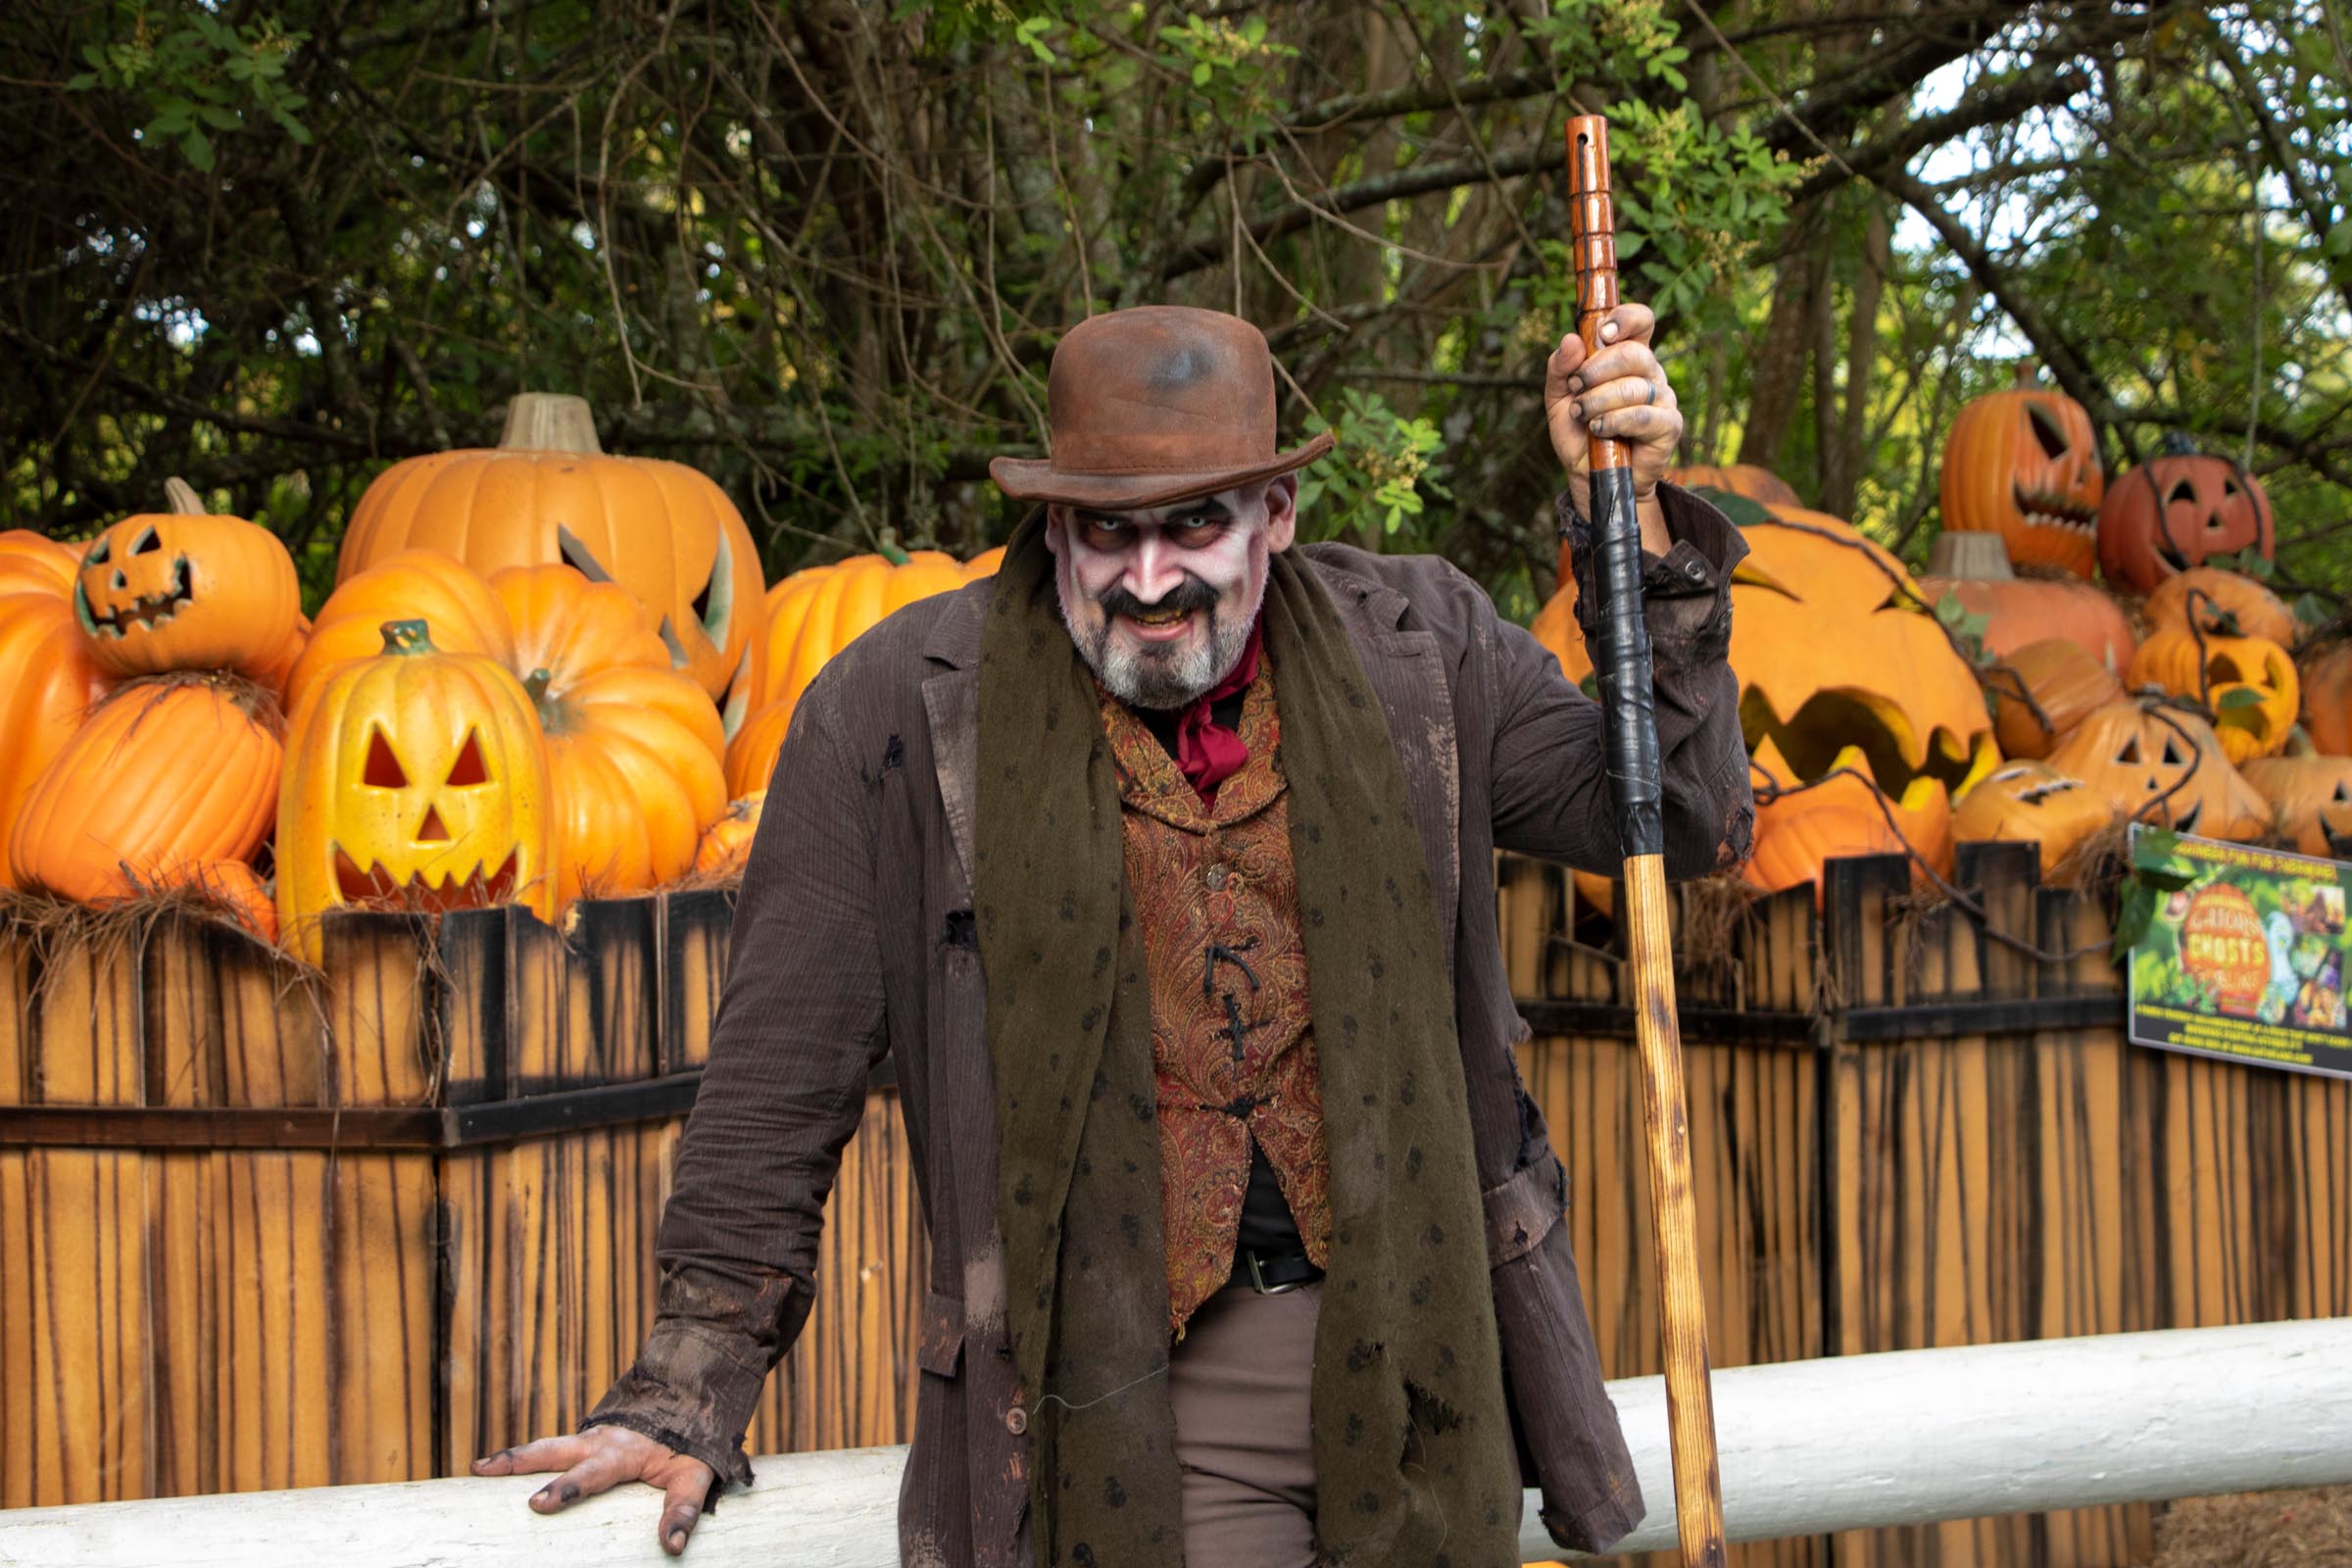 Spooky fun at Gators, Ghosts and Goblins, Gatorland's Halloween event!